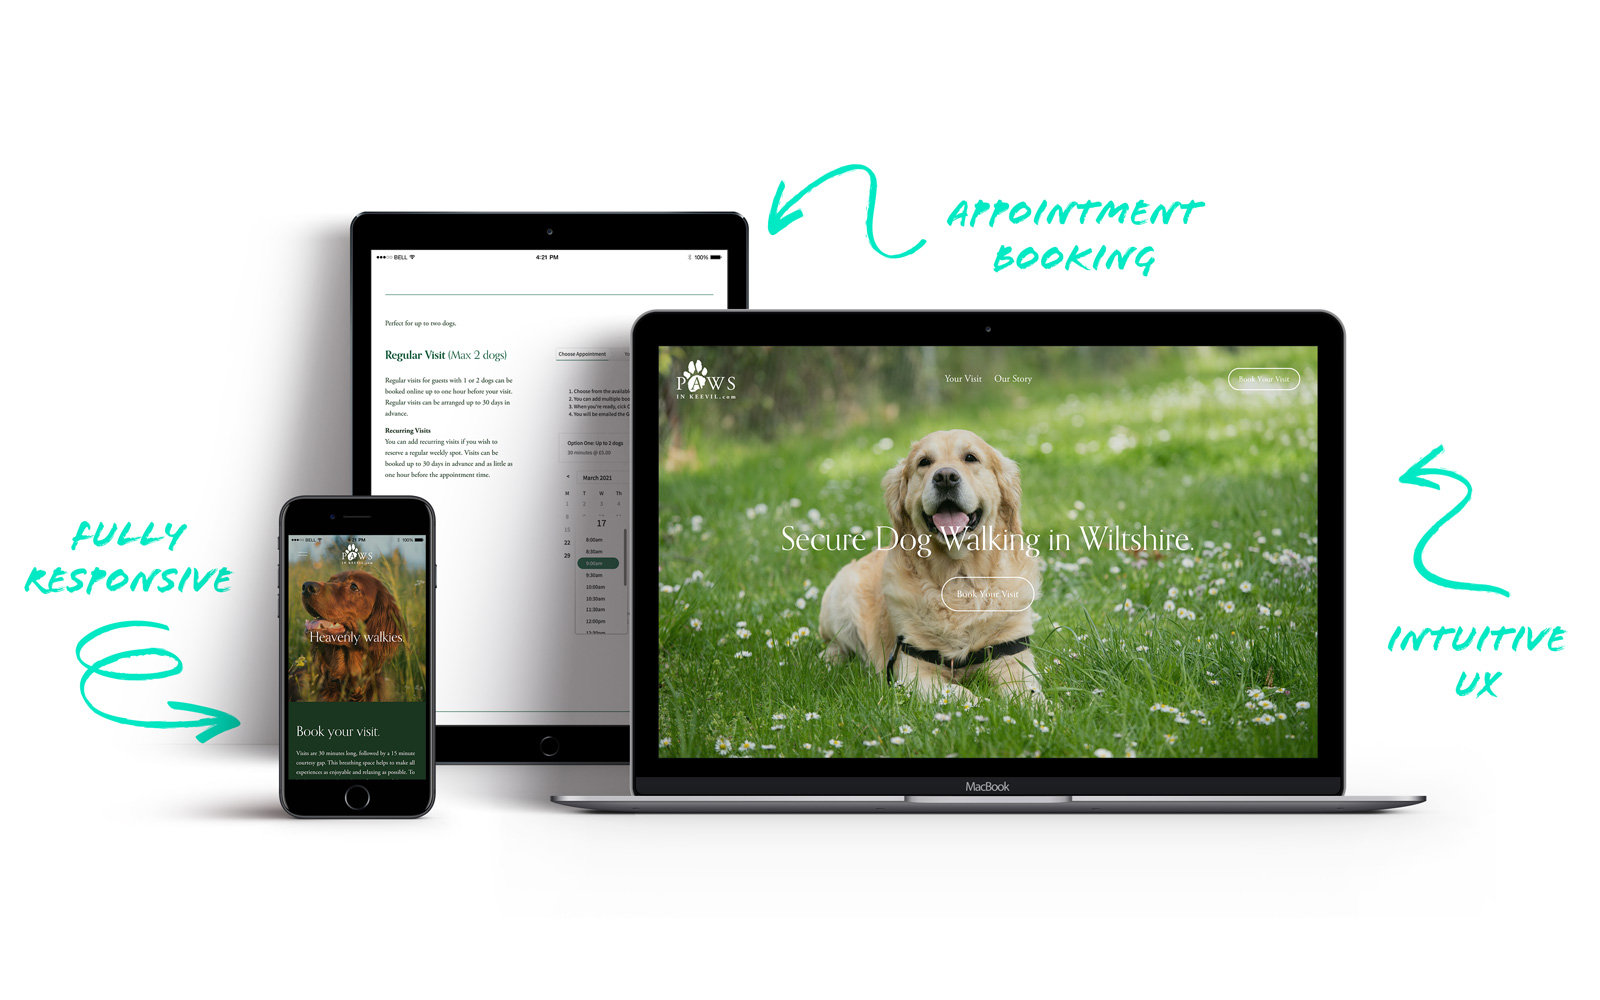 Complete brand identity solution for Dog Walking company